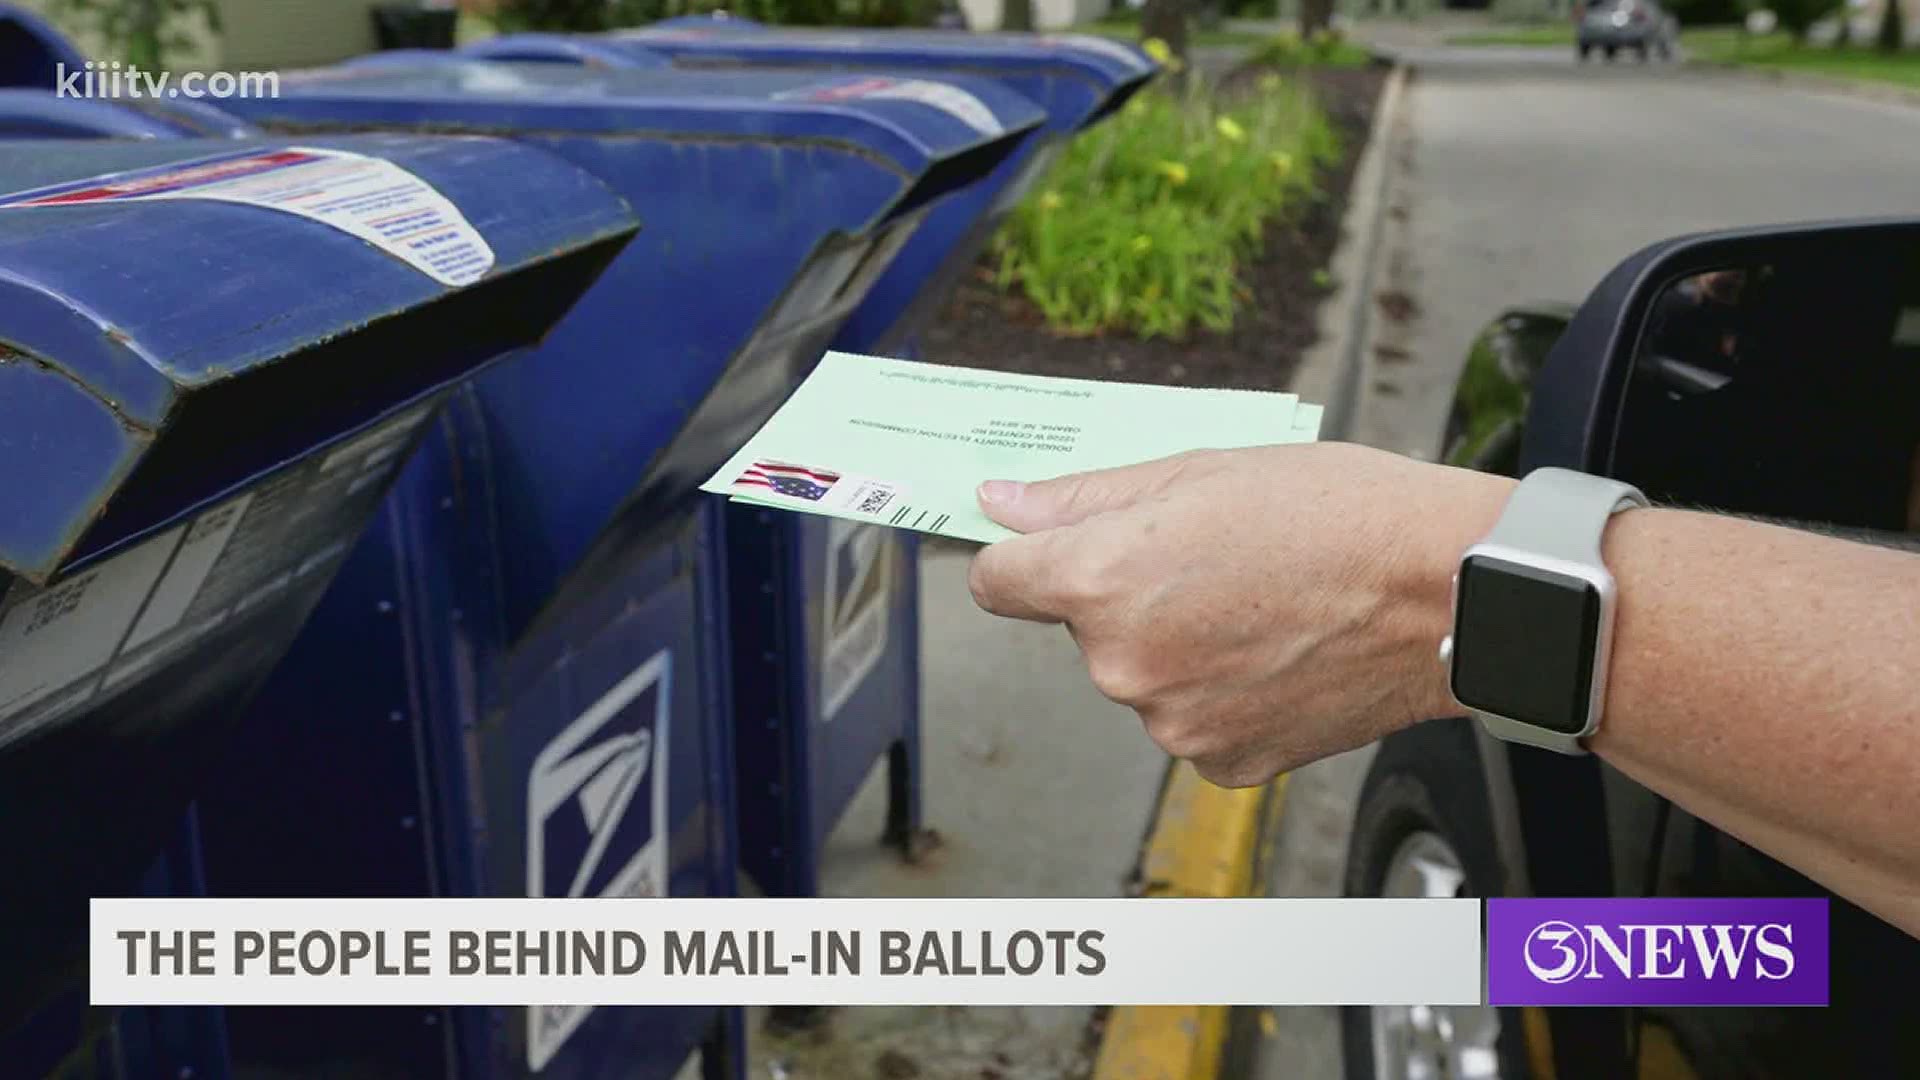 Here's a breakdown of the mail in ballot application process and what you need to know before sending yours in.